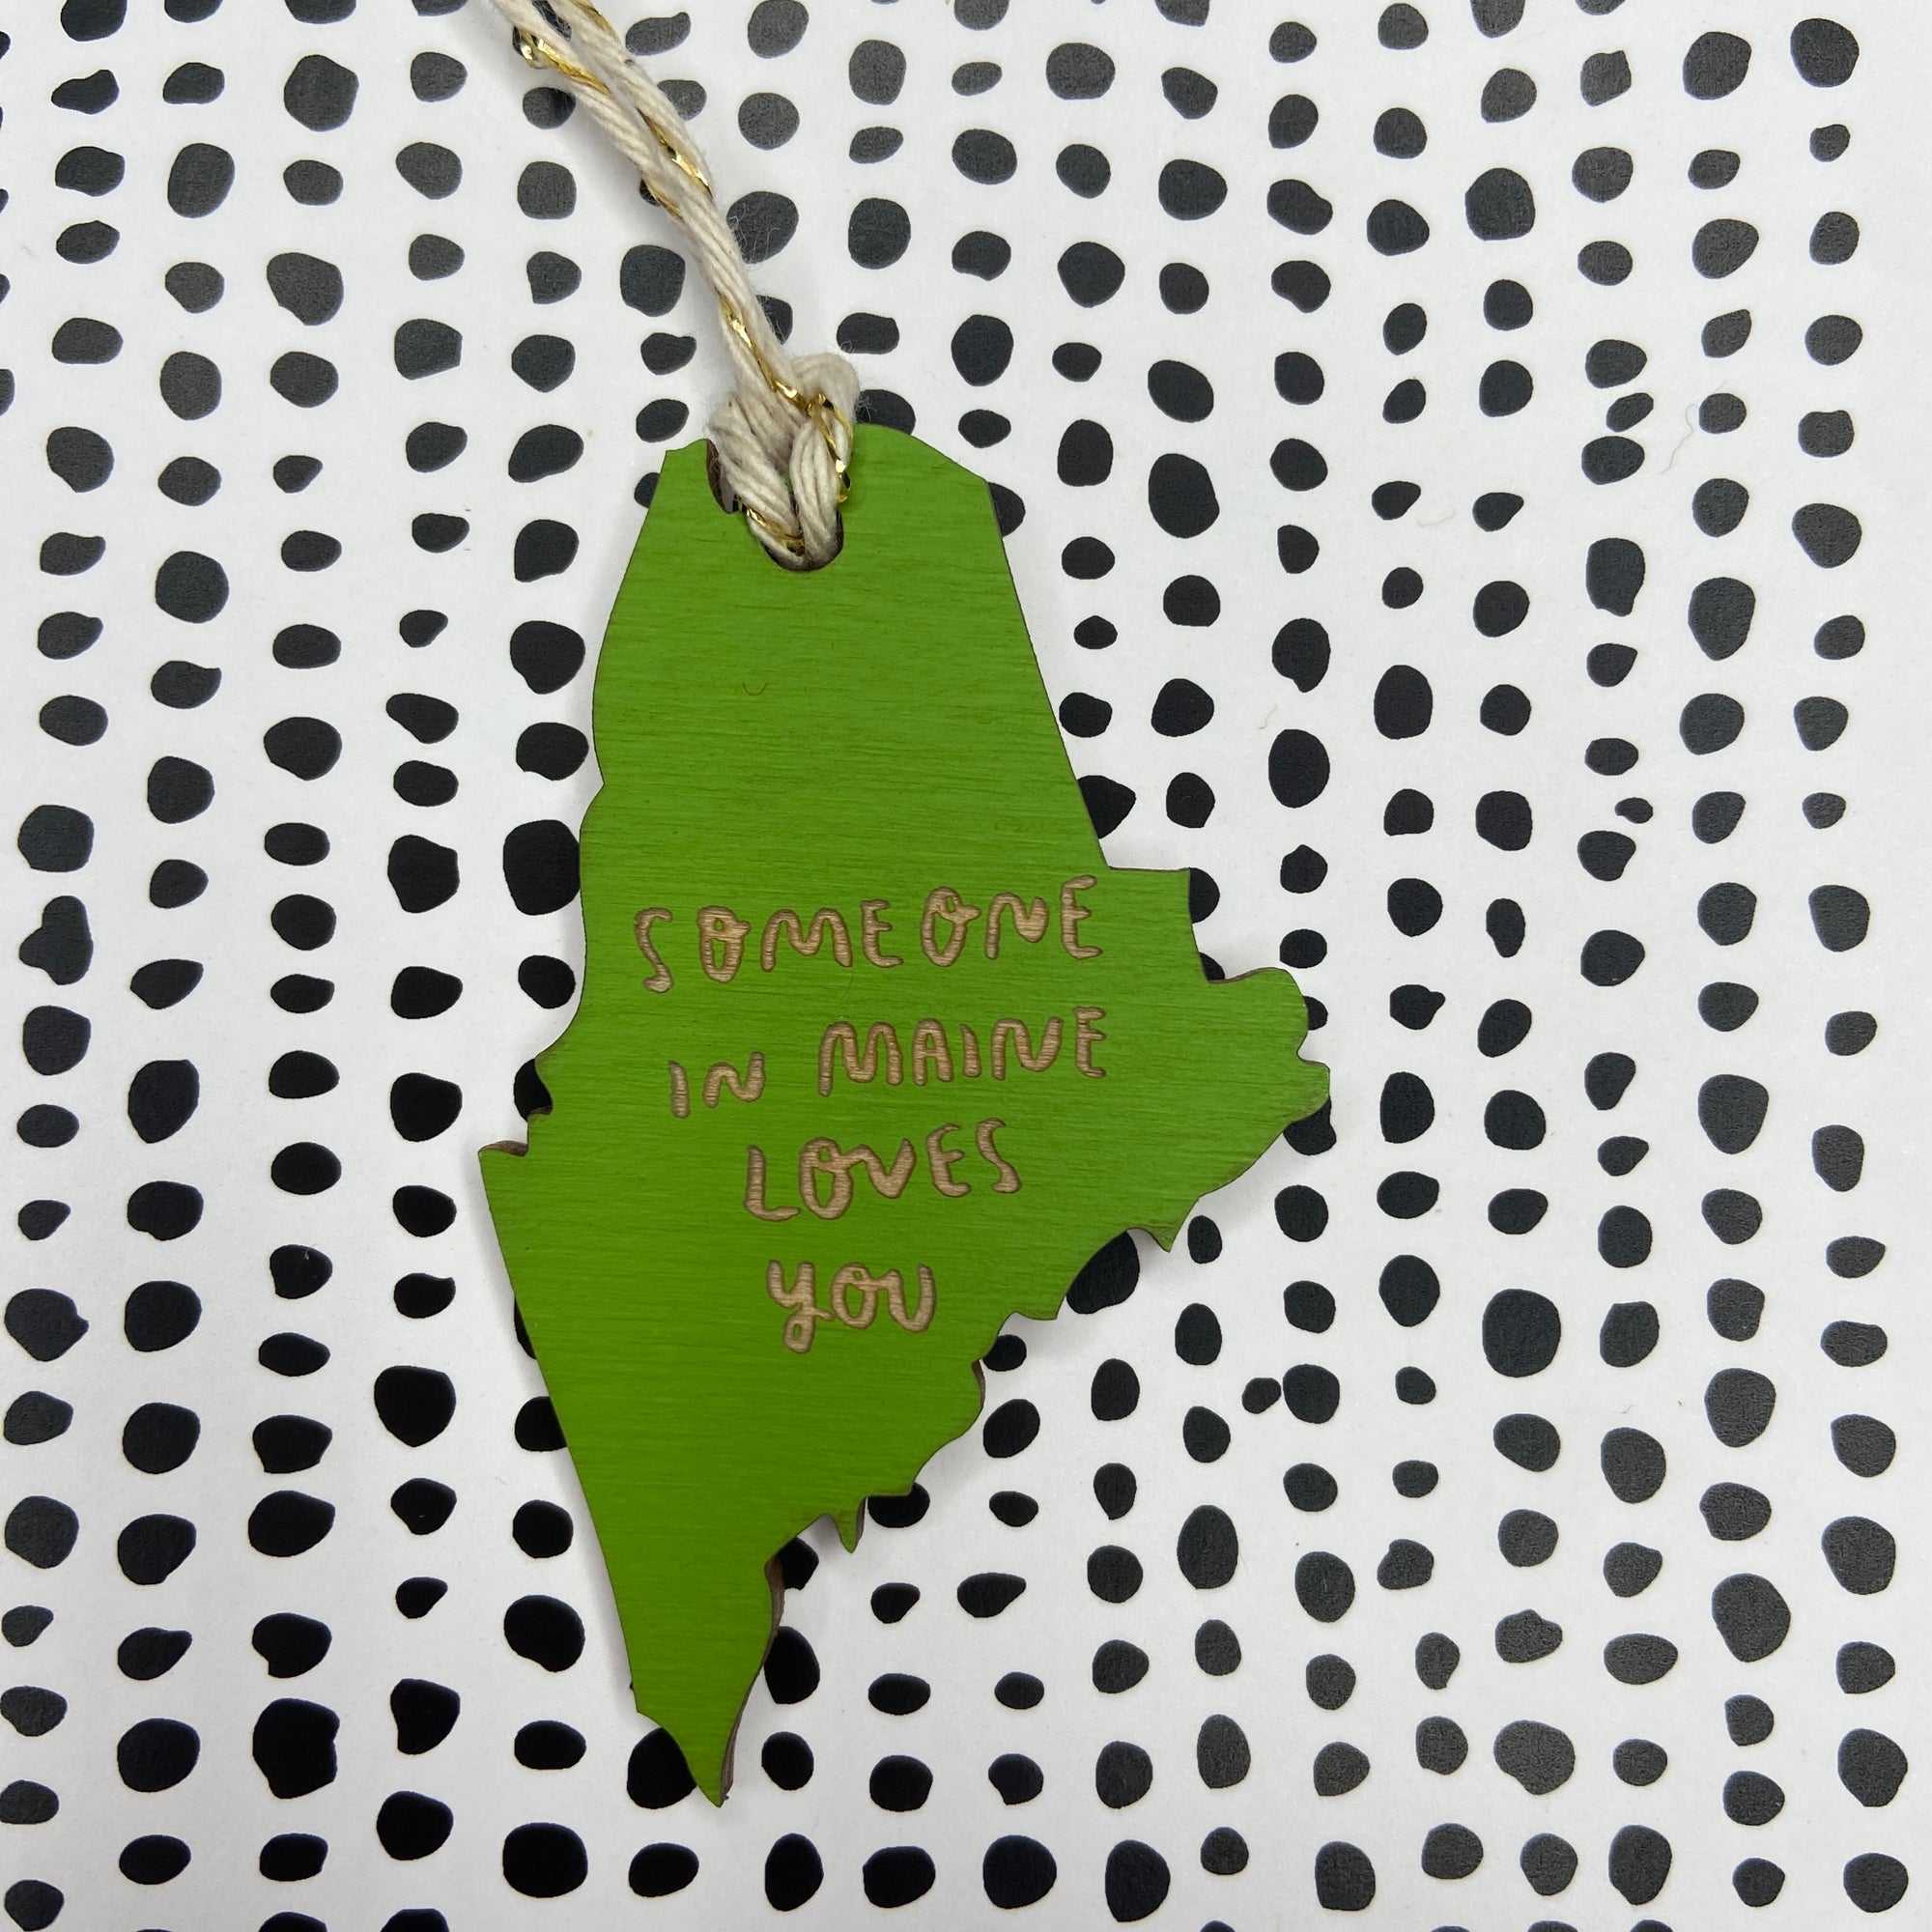 Someone in Maine Loves you Ornament Card